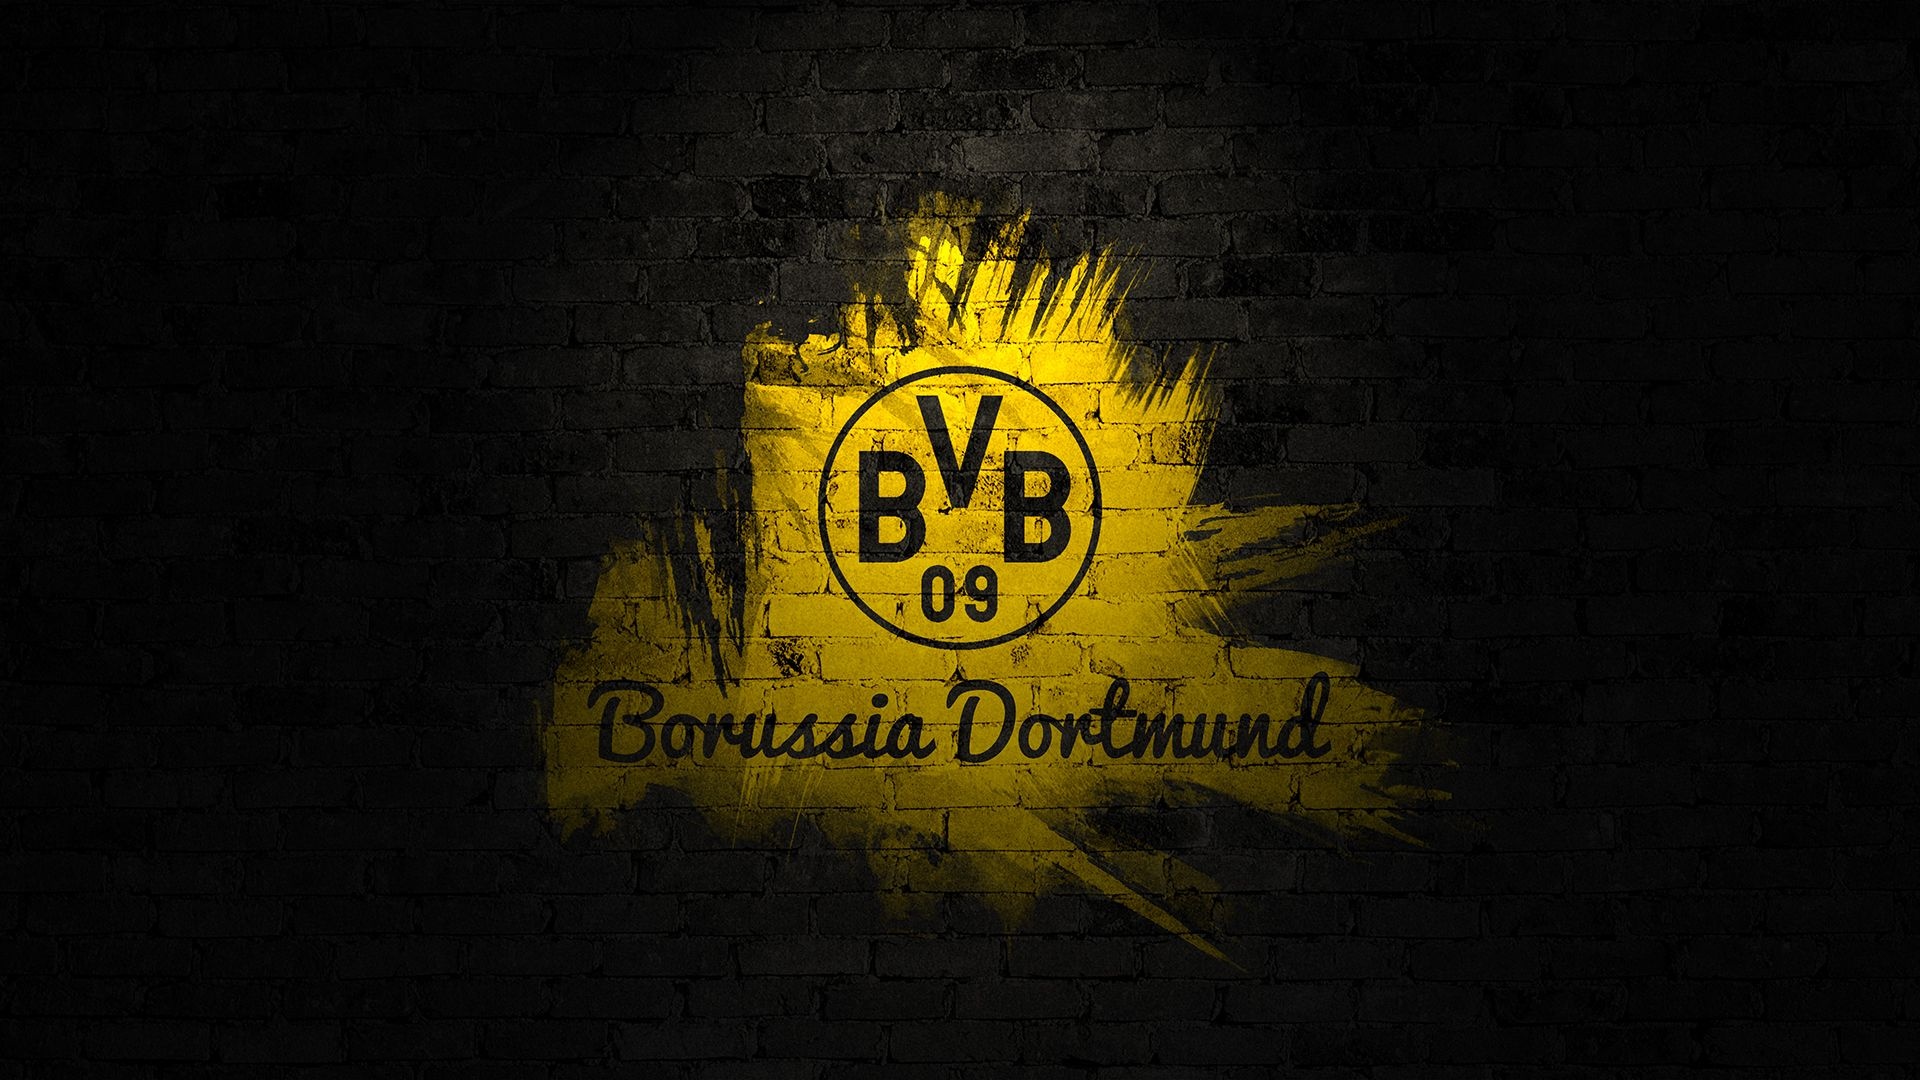 Borussia Dortmund: BVB, one of the biggest clubs in Germany, as well as Europe, with one of the most passionate followings. 1920x1080 Full HD Wallpaper.